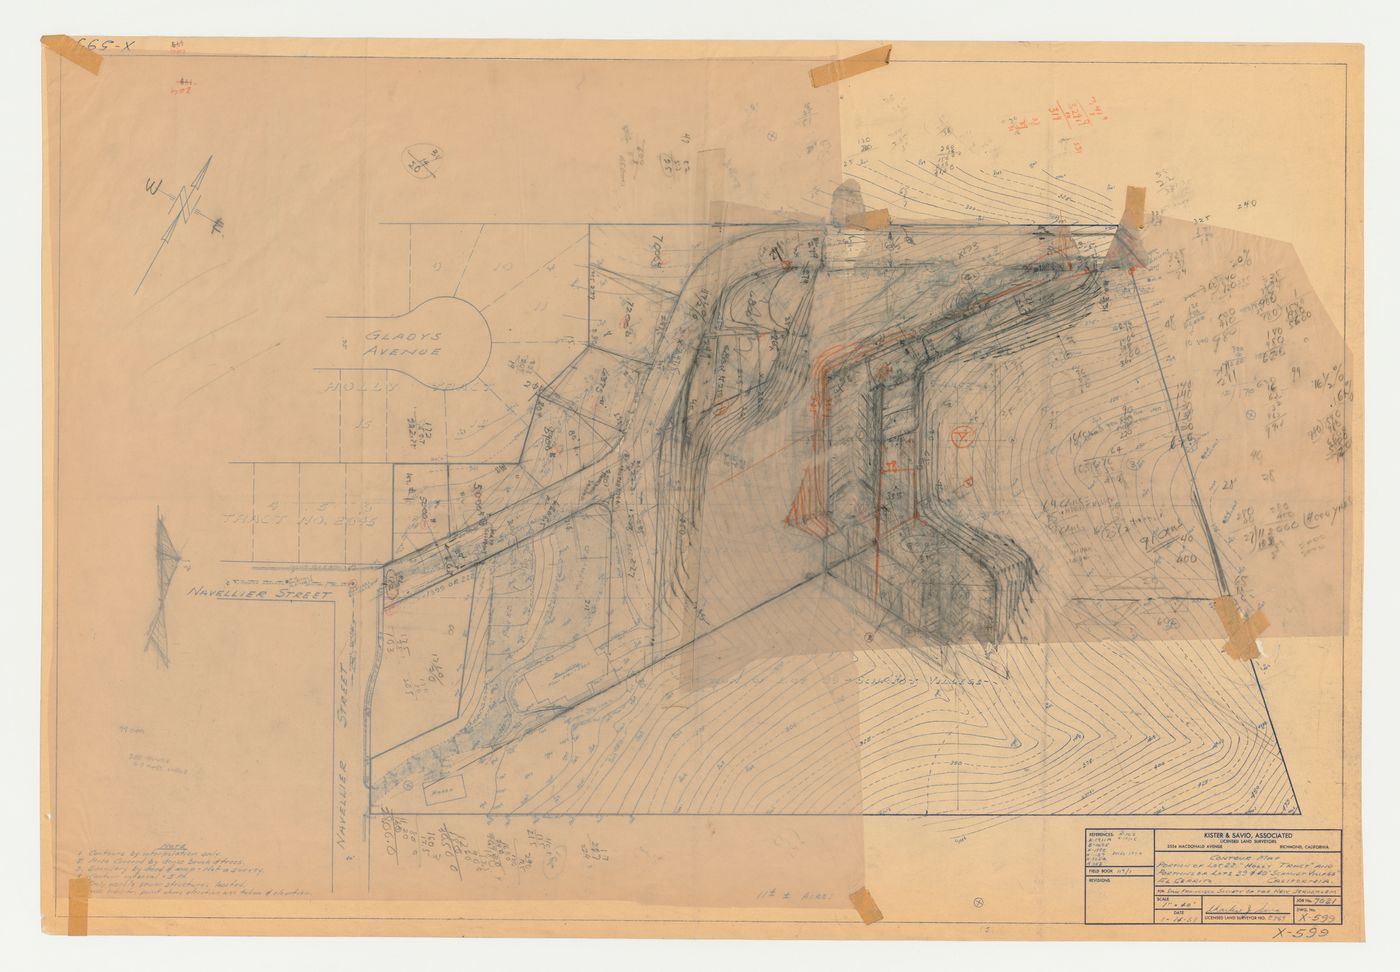 Swedenborg Memorial Chapel, El Cerrito, California: Site plan on a contour map of lot 22 and portions of lots 39 and 40